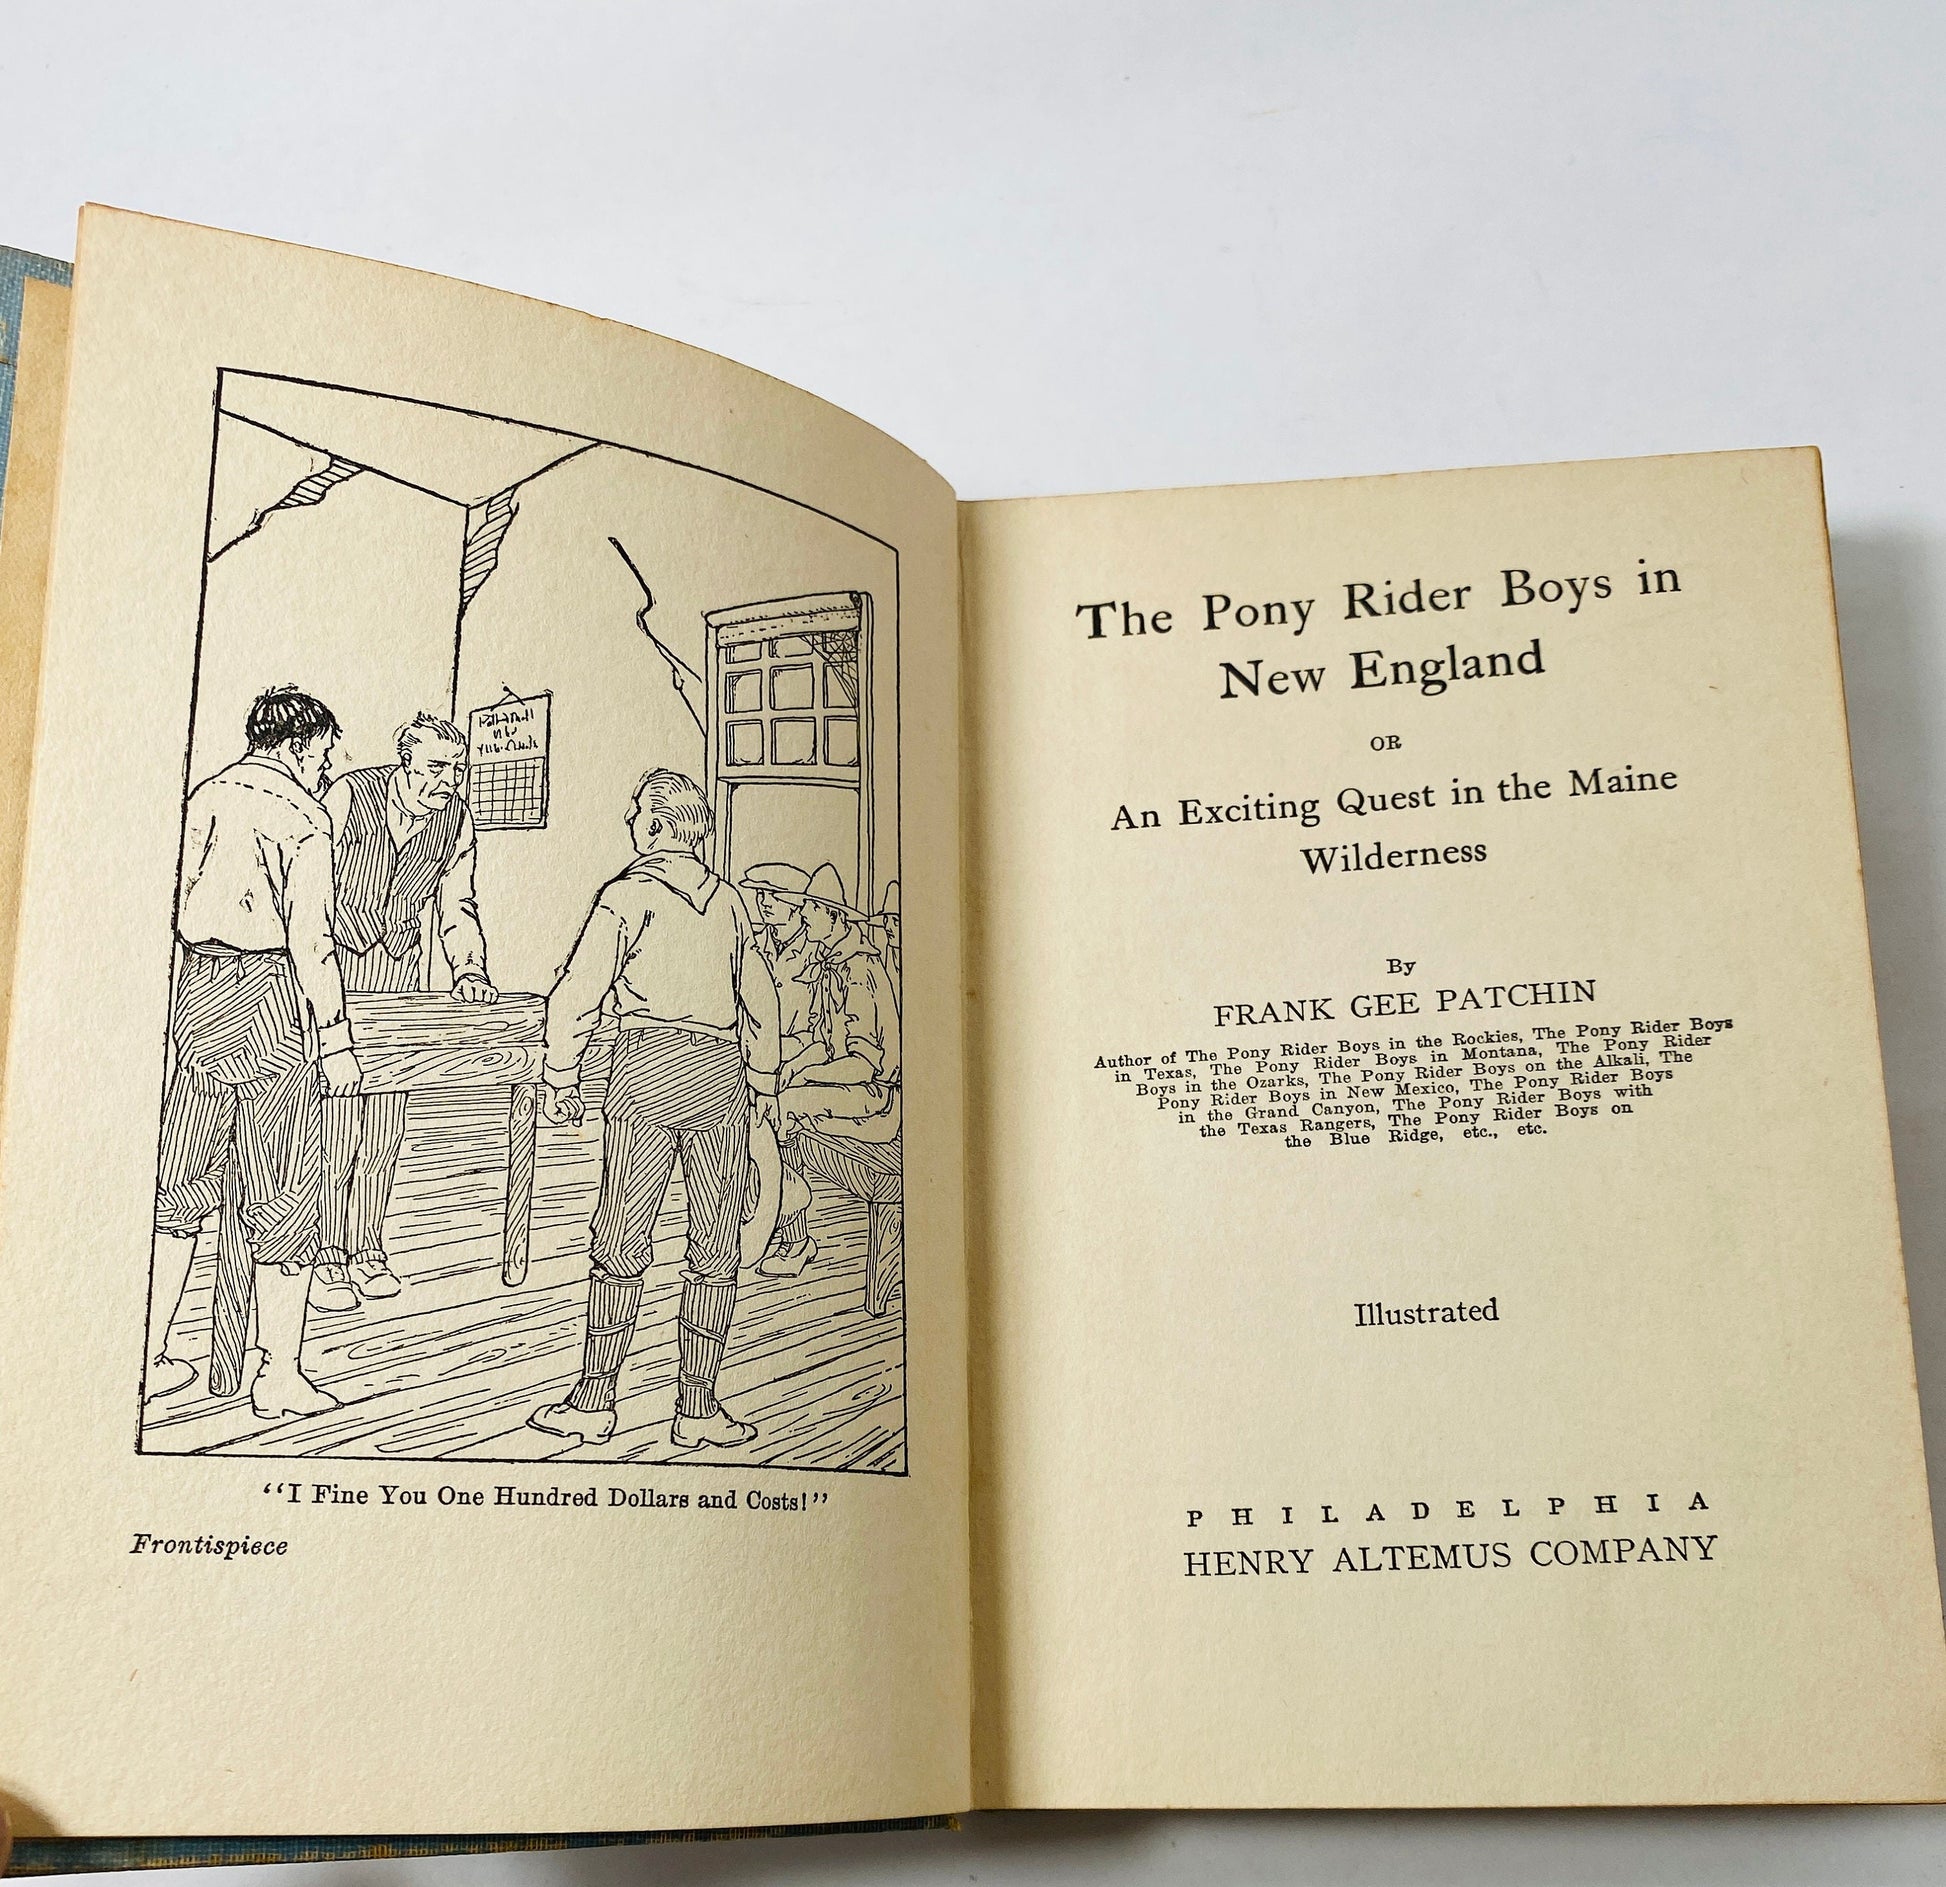 1924 Antique Pony Rider Boys in New England book by Frank Gee Patchin Vintage book Saalfield Publishing Company Cowboy western